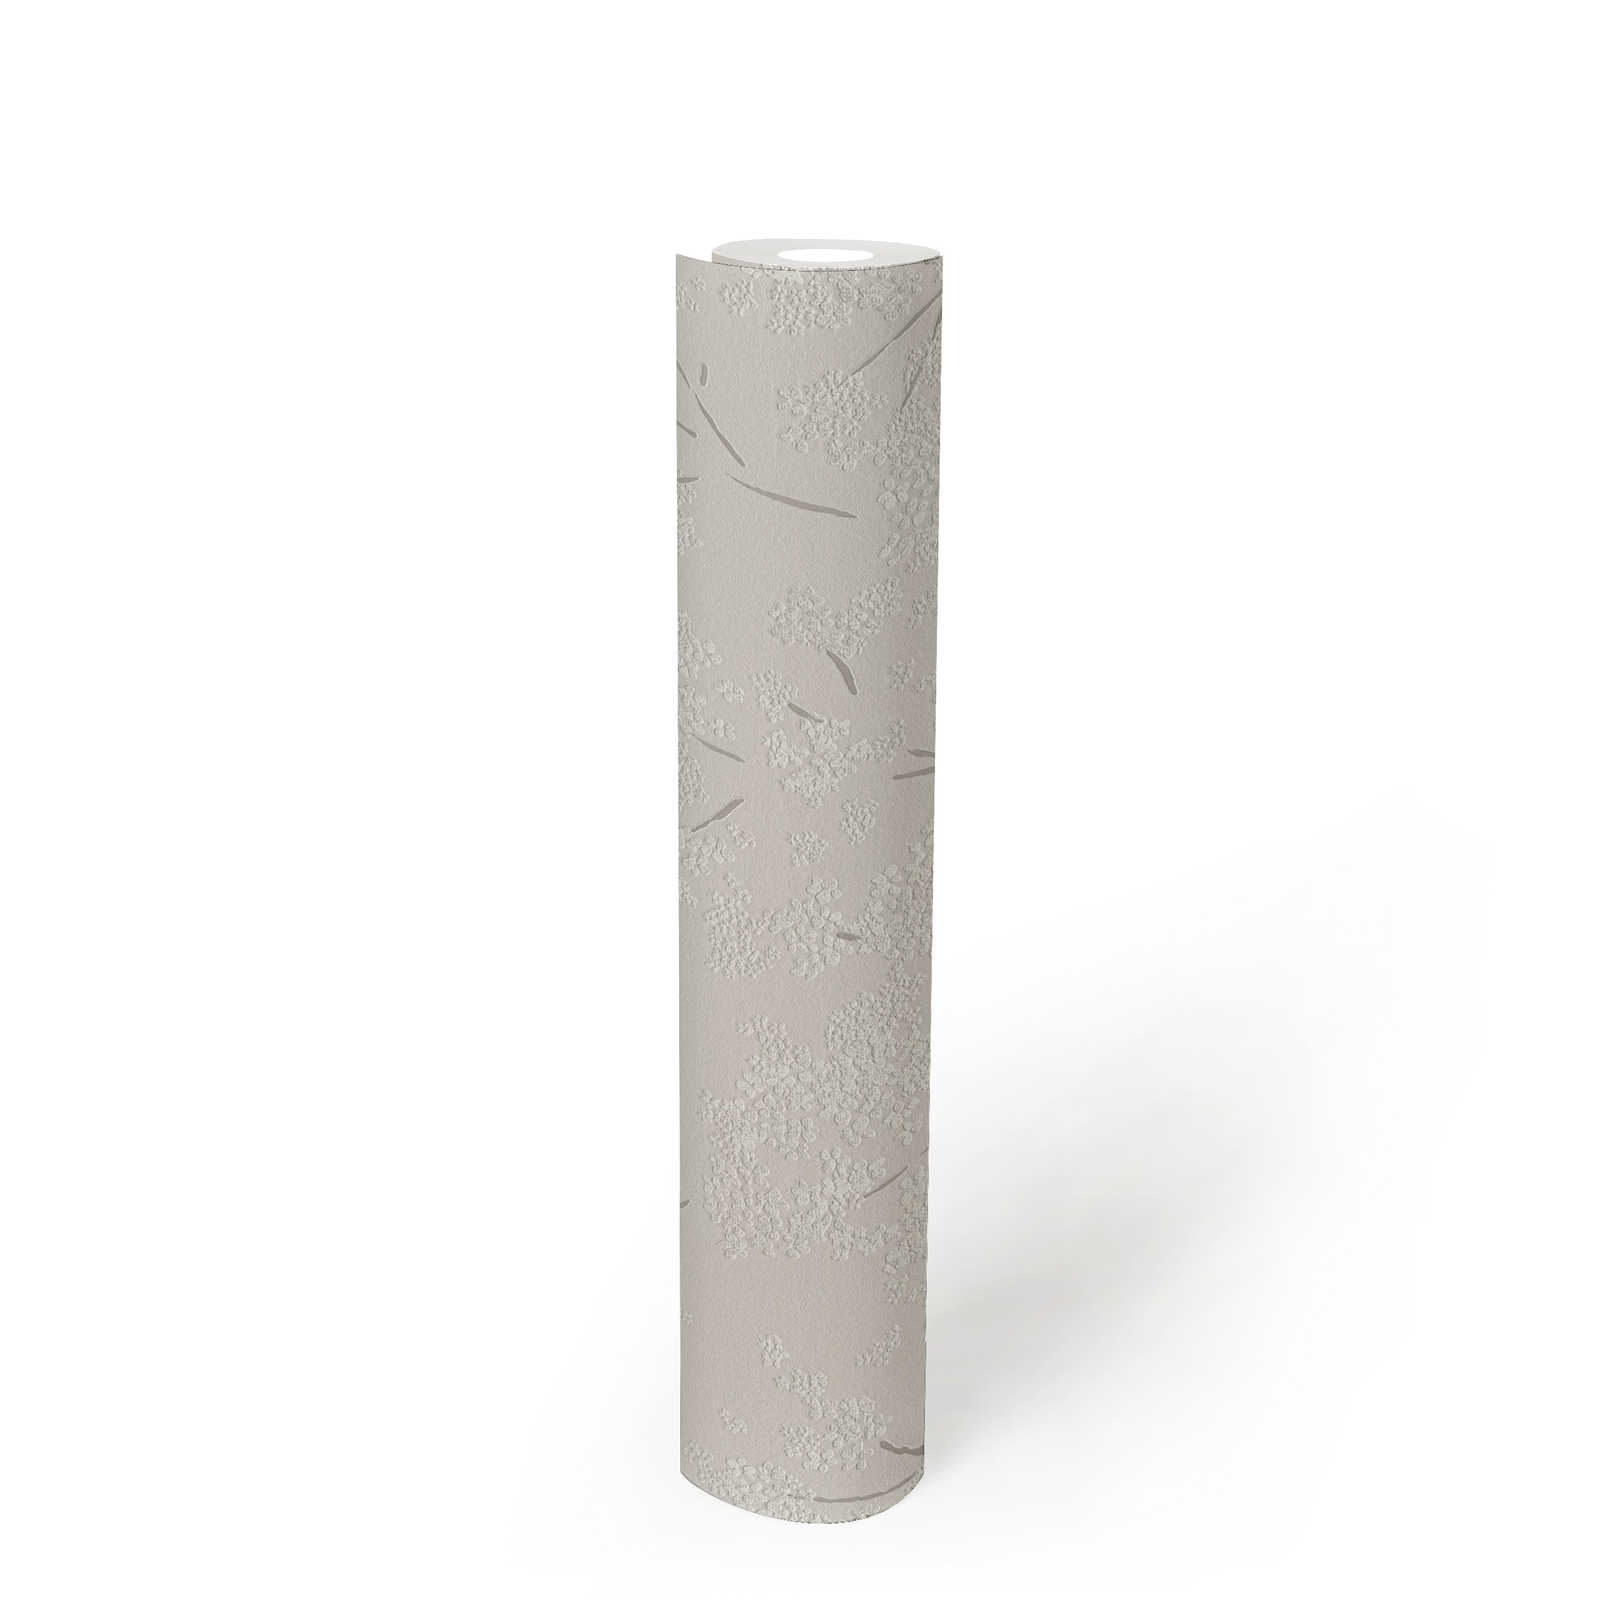             Non-woven wallpaper with abstract floral pattern - grey, white
        